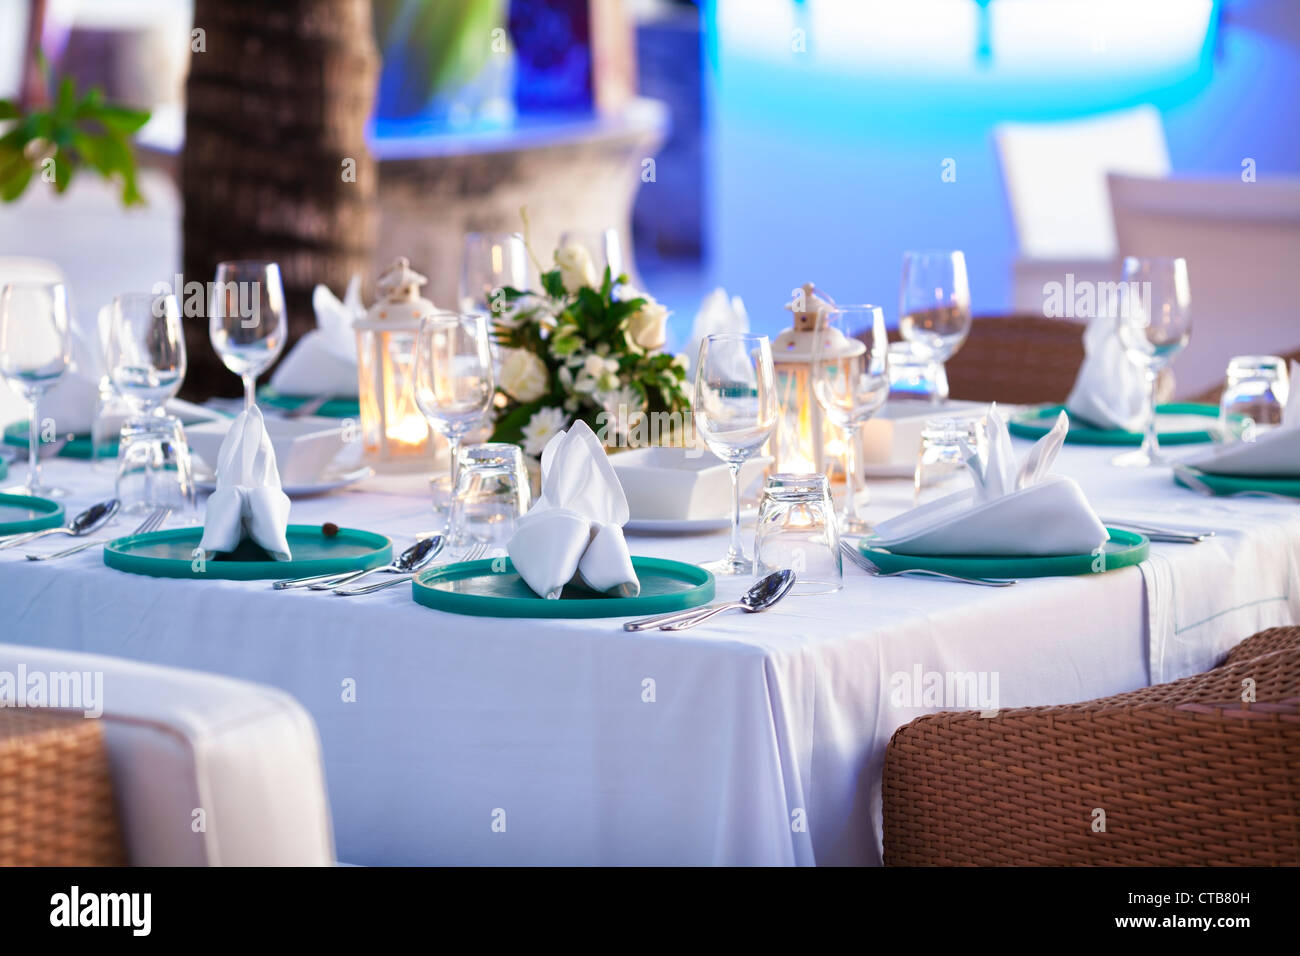 Inside the luxury outdoor restaurant. Shallow depth of field. Stock Photo